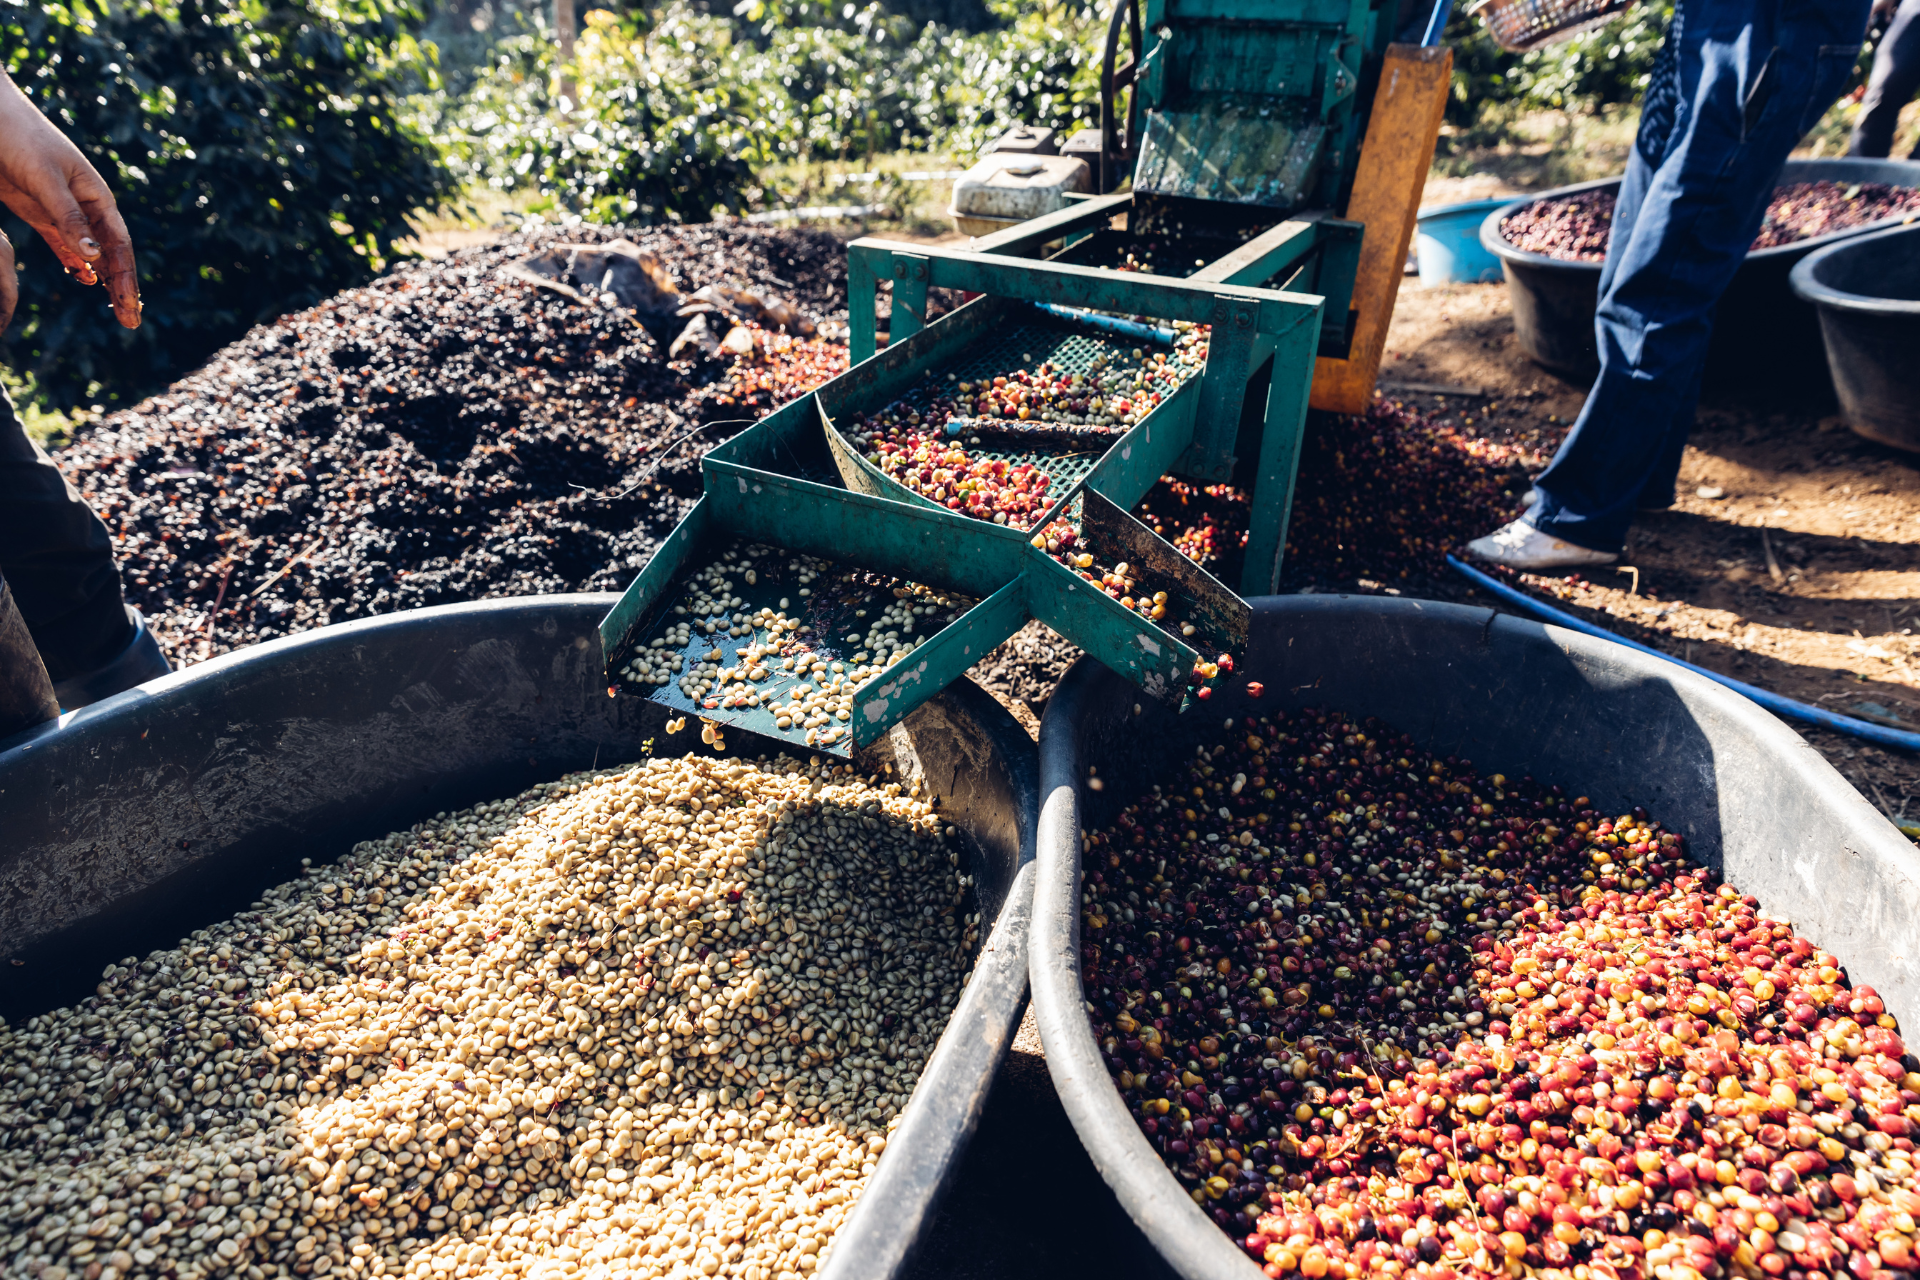 Insights into the Coffee Business